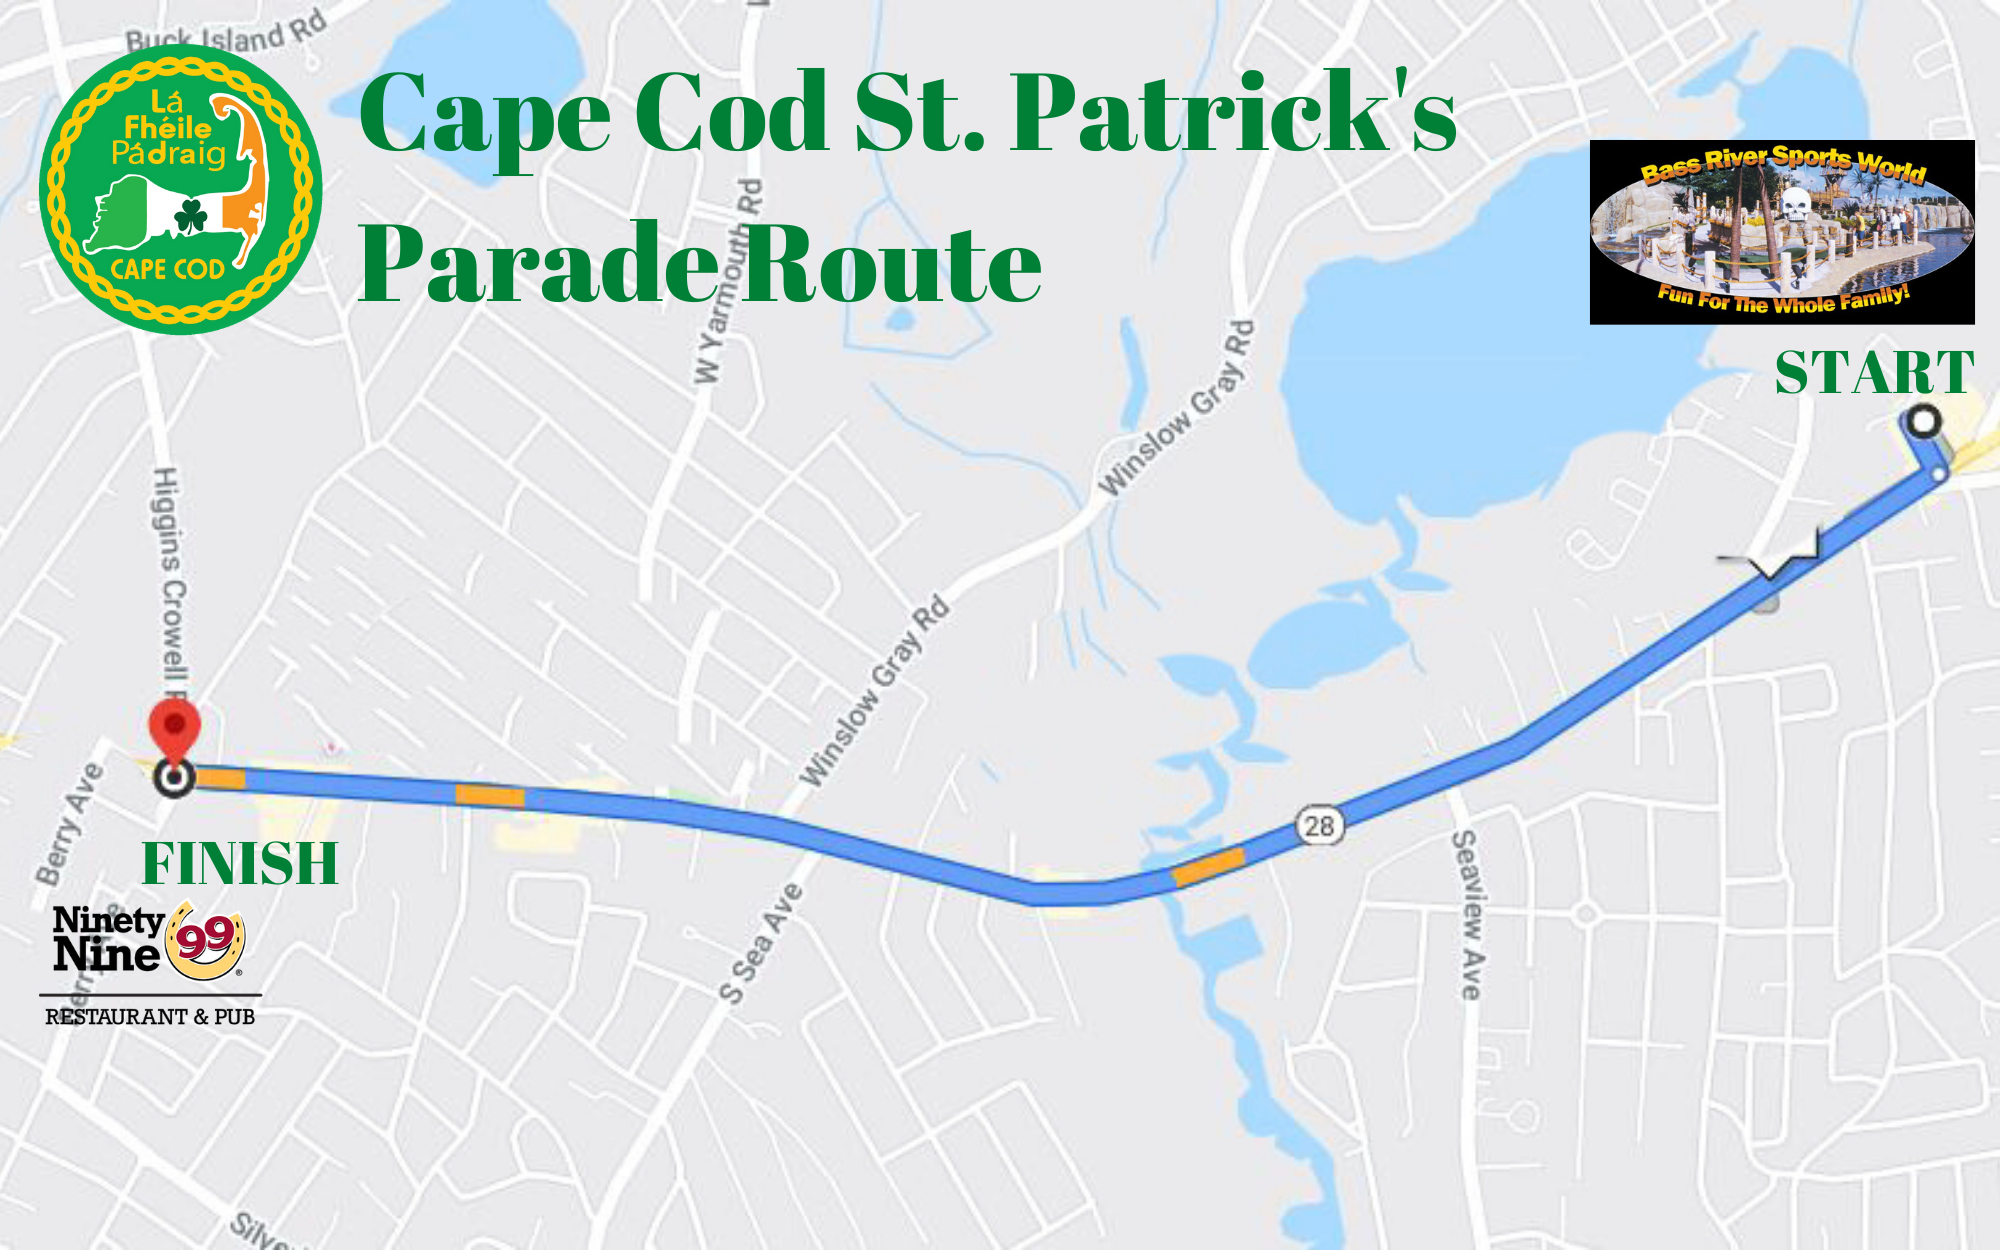 Cape Cod St. Patrick’s Parade 18 years of parades